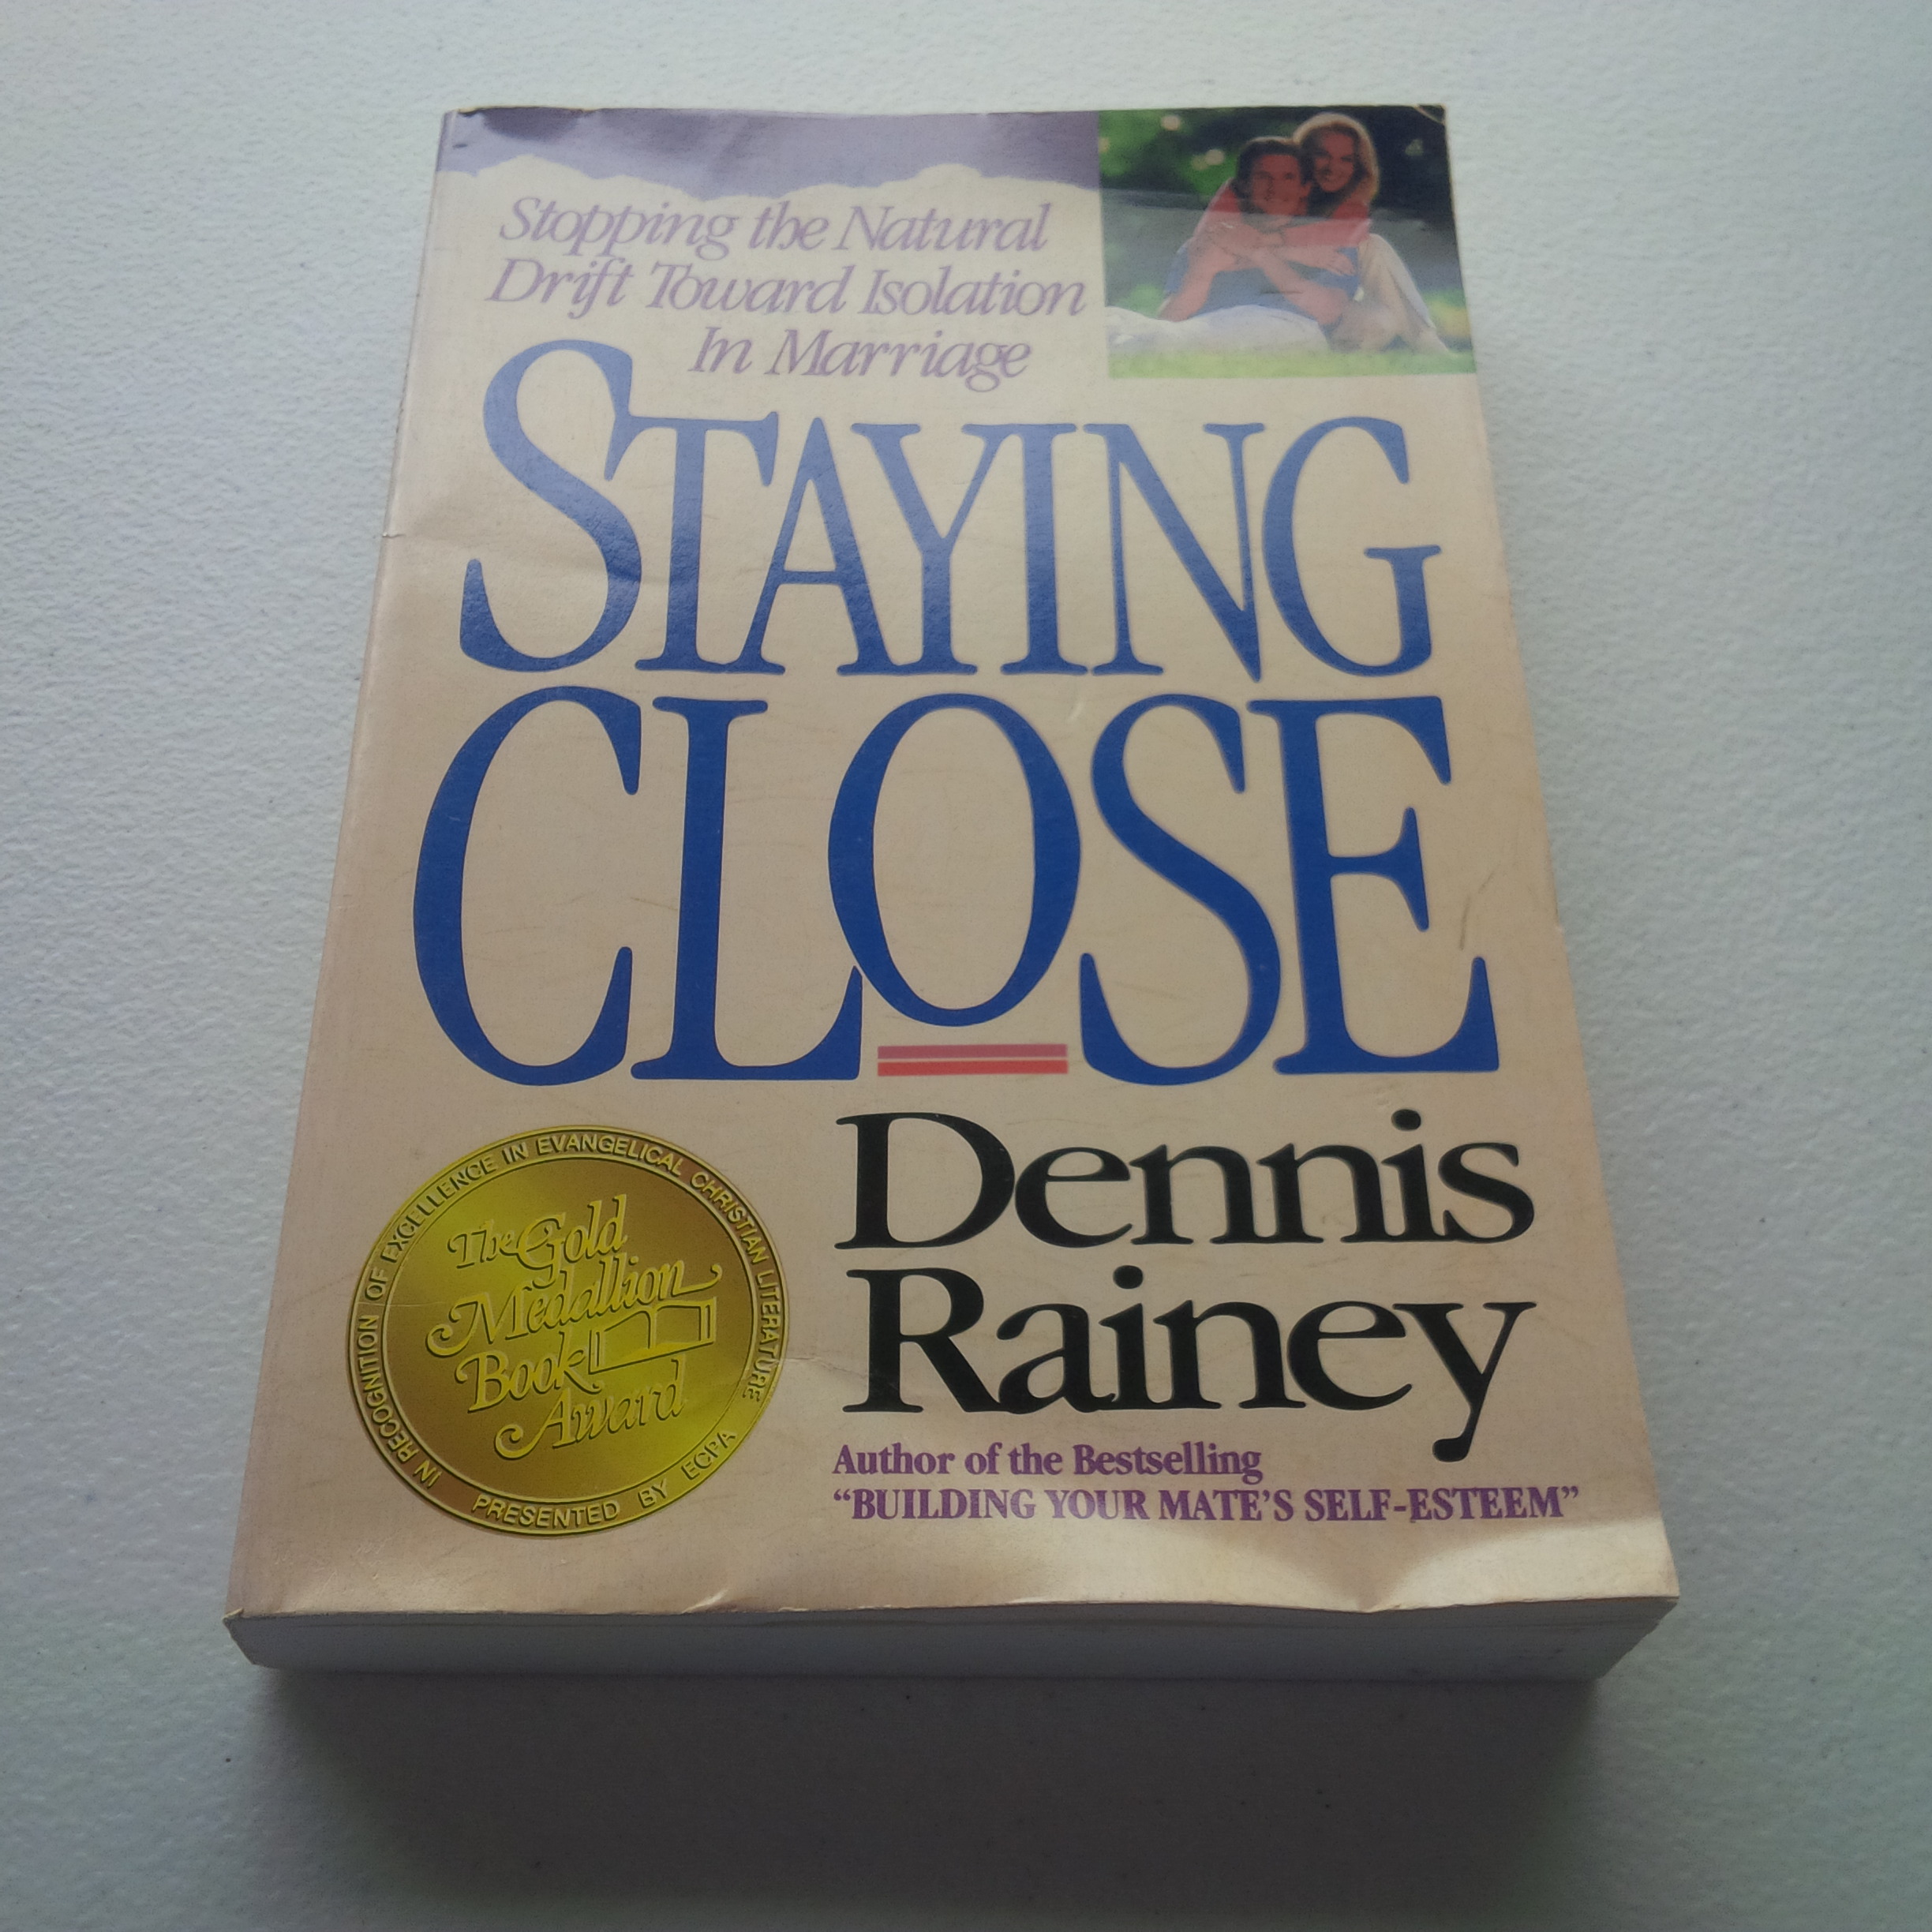 Used  1989 Dennis Rainey 0-8499-3343-9 Staying Close - St...